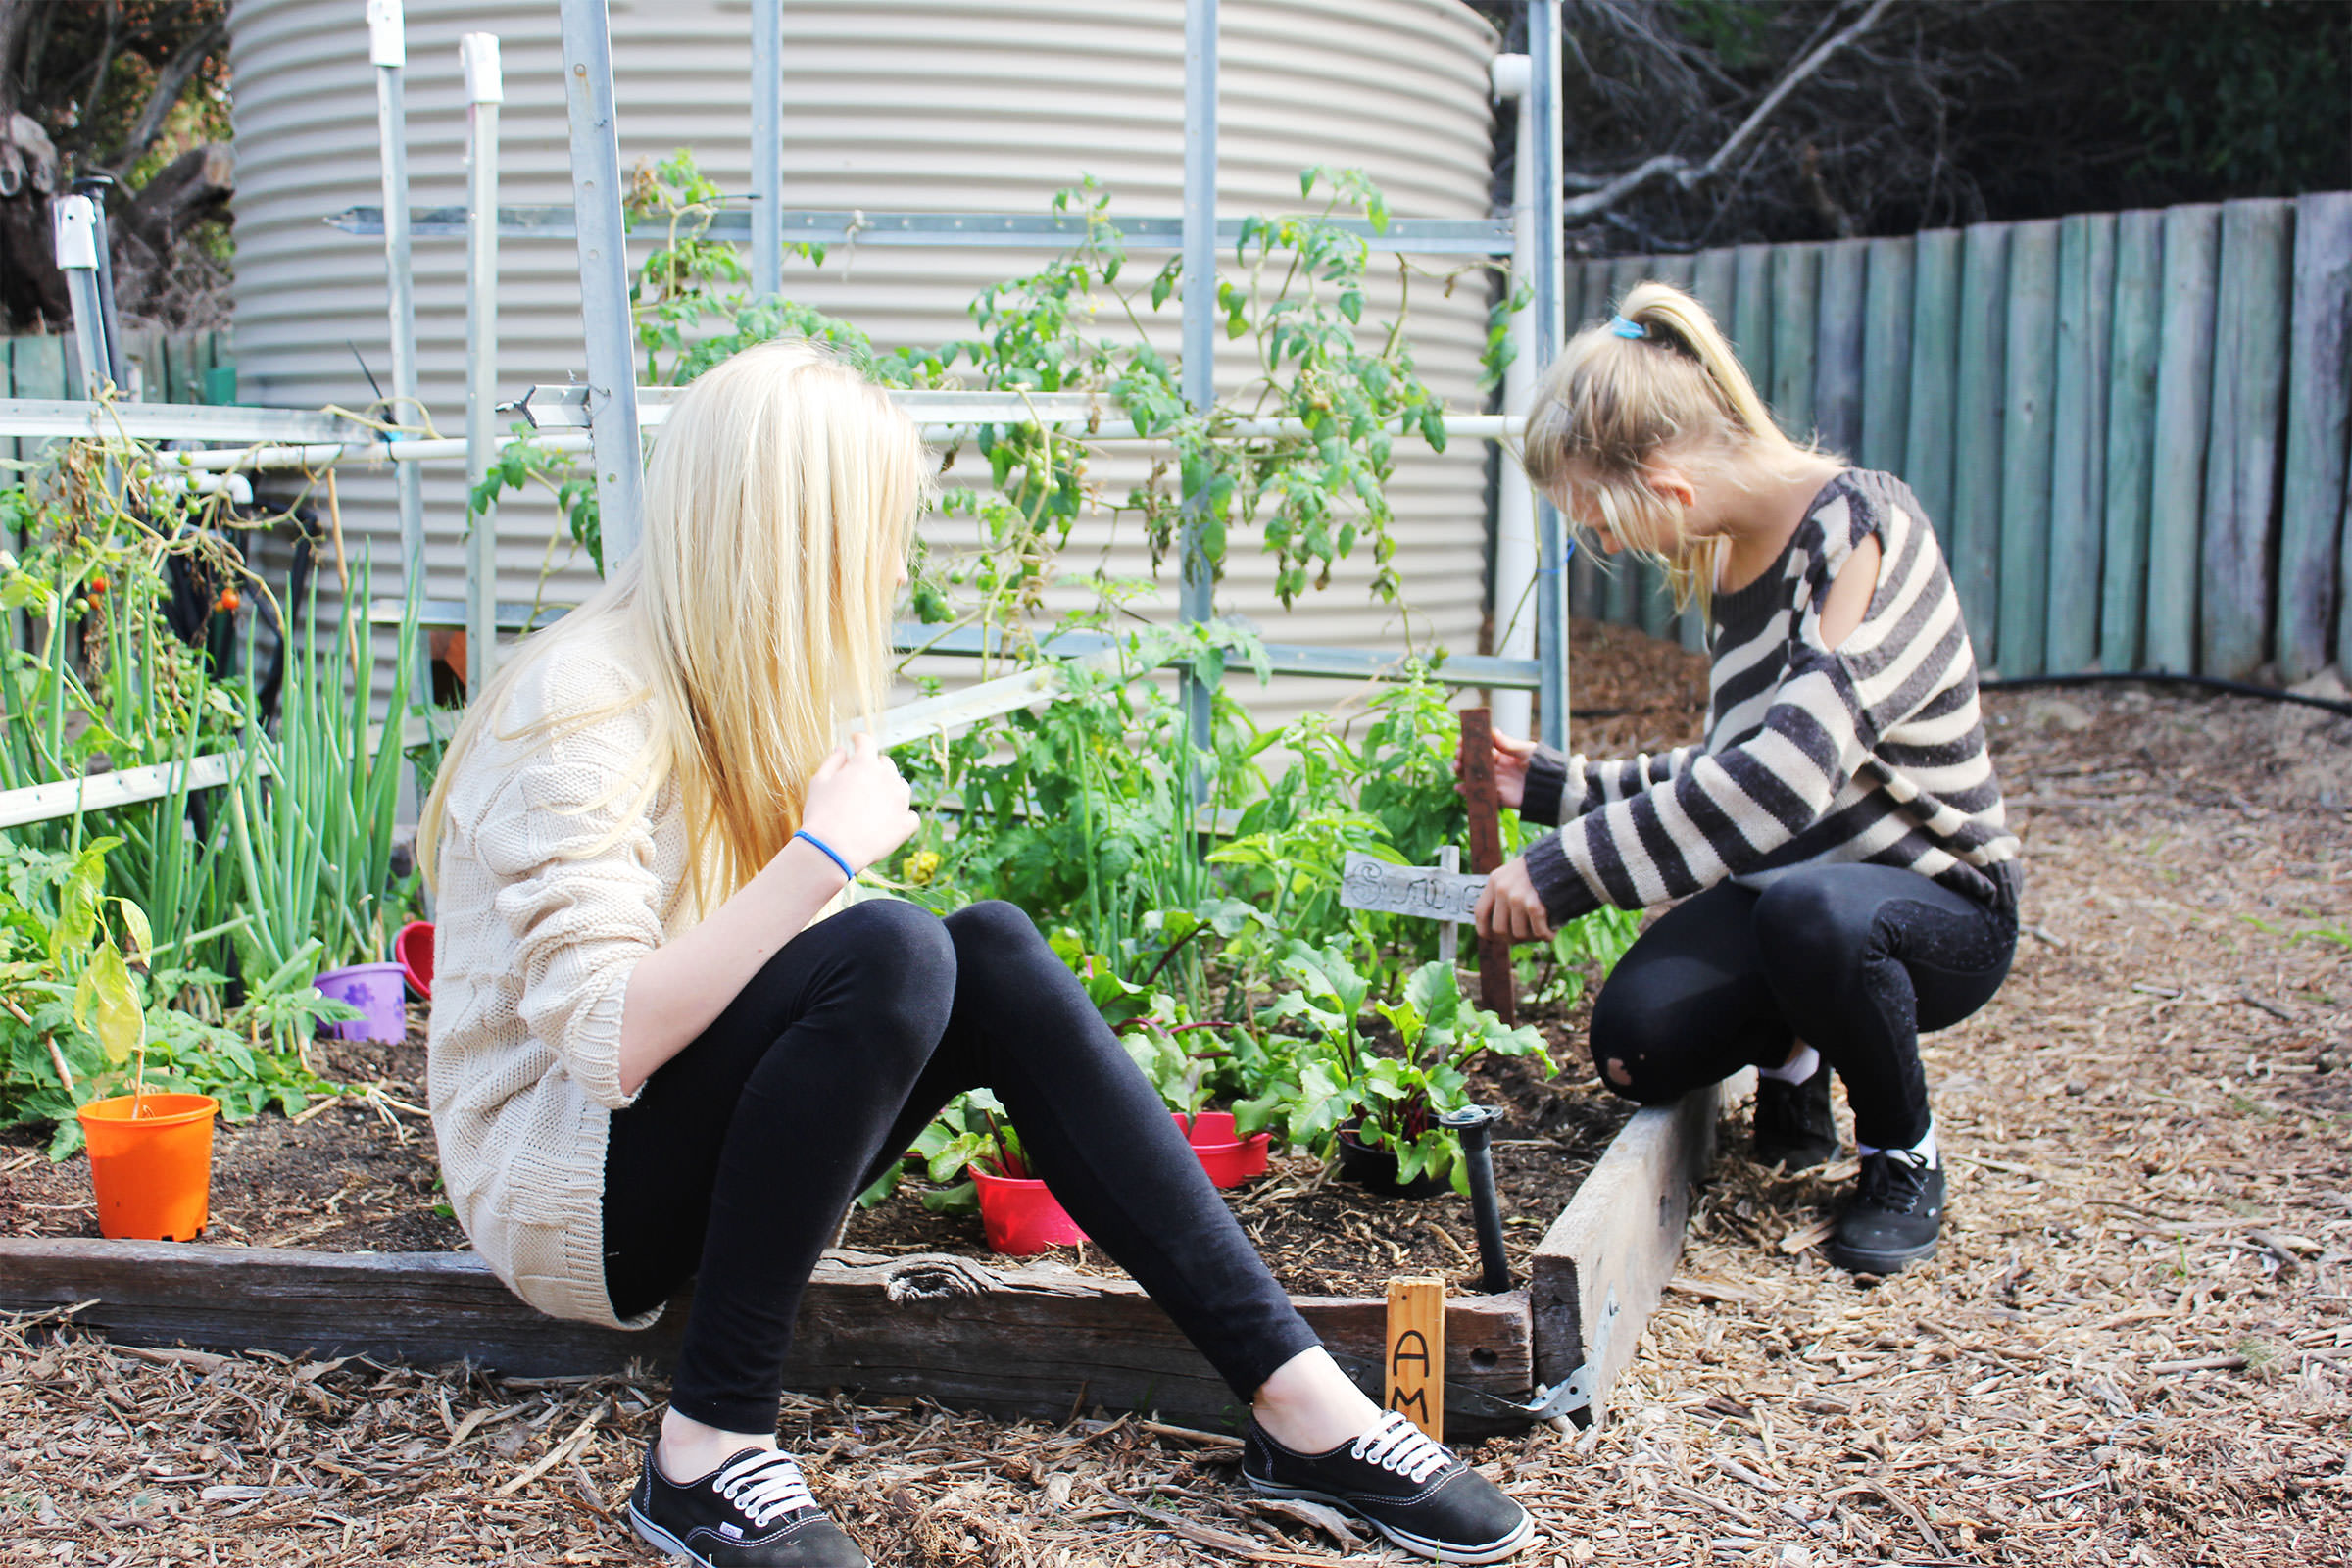 Two adolescents gardening